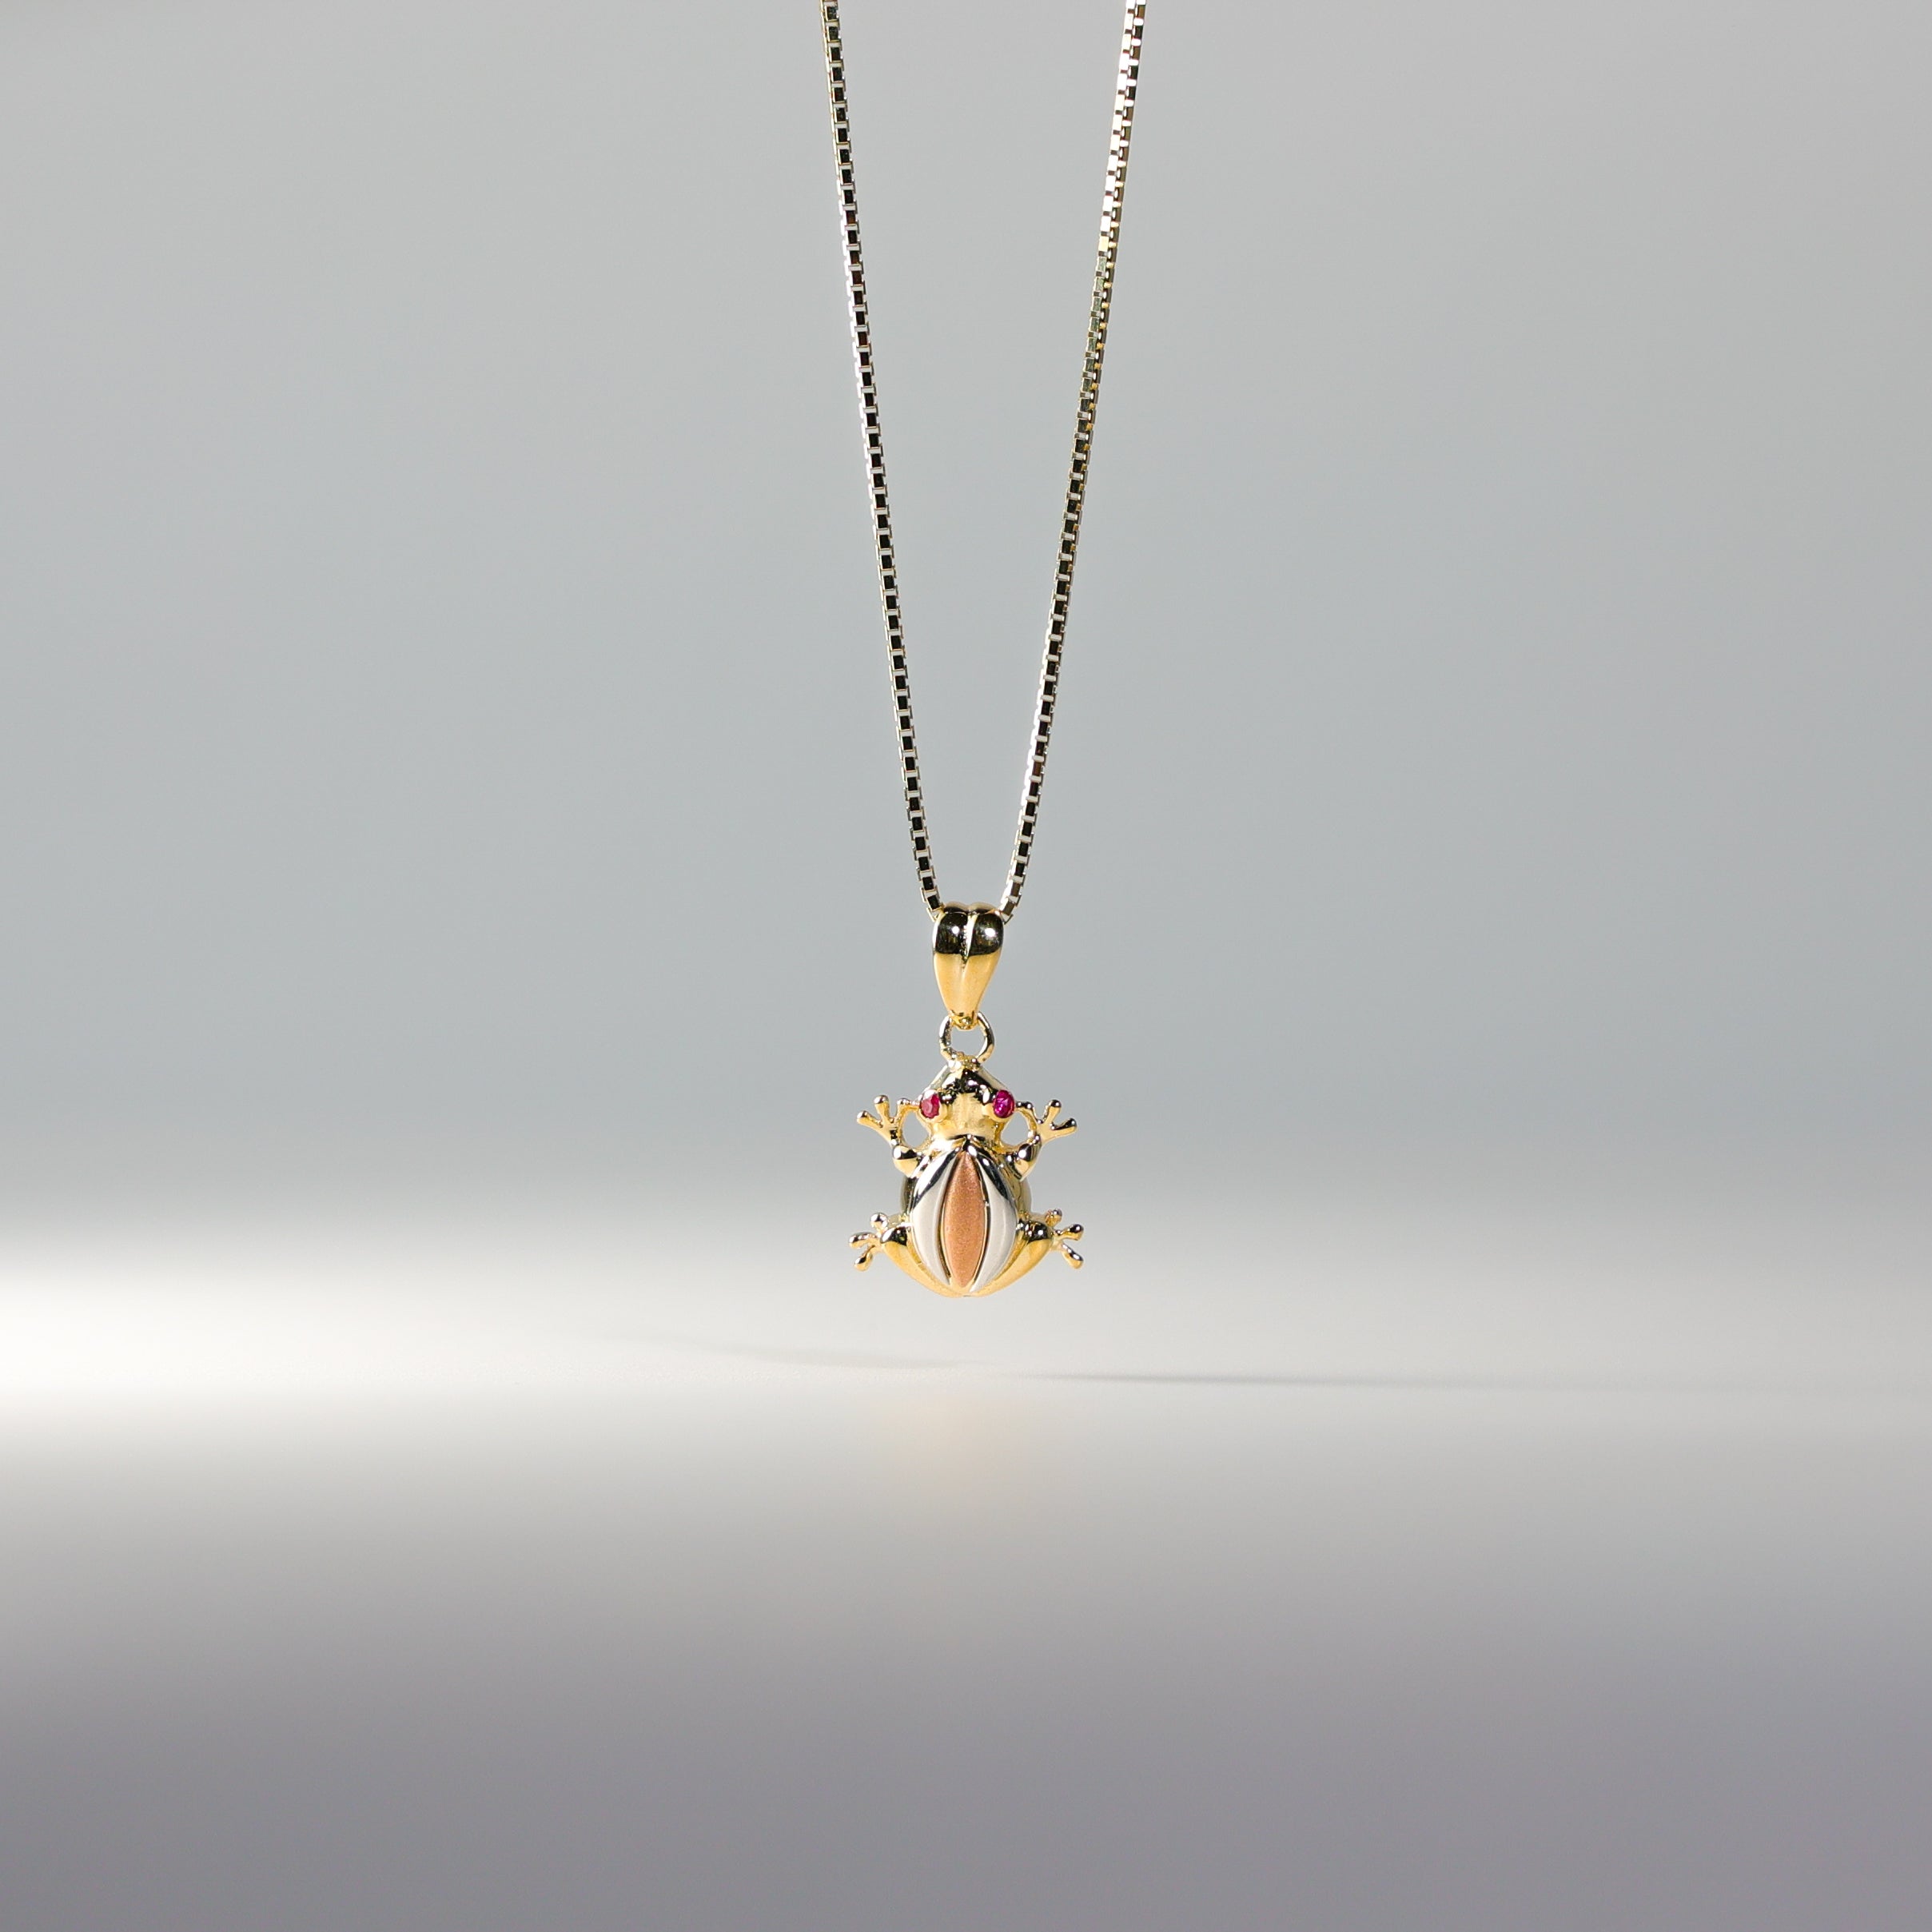 Yellow Gold Frog Pendant Model-1548 - Charlie & Co. Jewelry